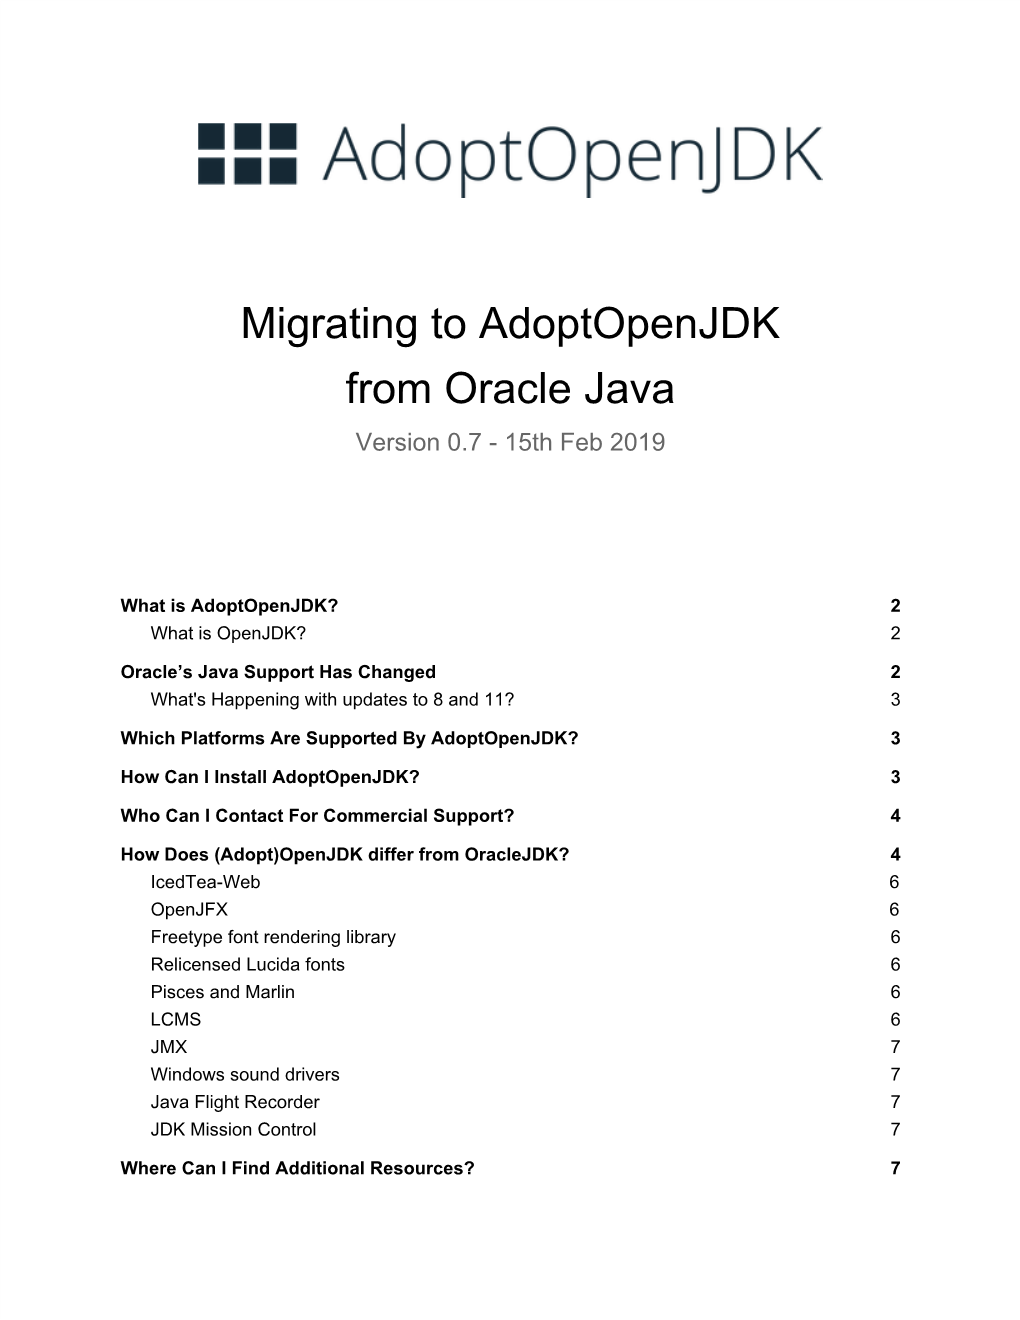 Migrating to Adoptopenjdk from Oracle Java Version 0.7 - 15Th Feb 2019